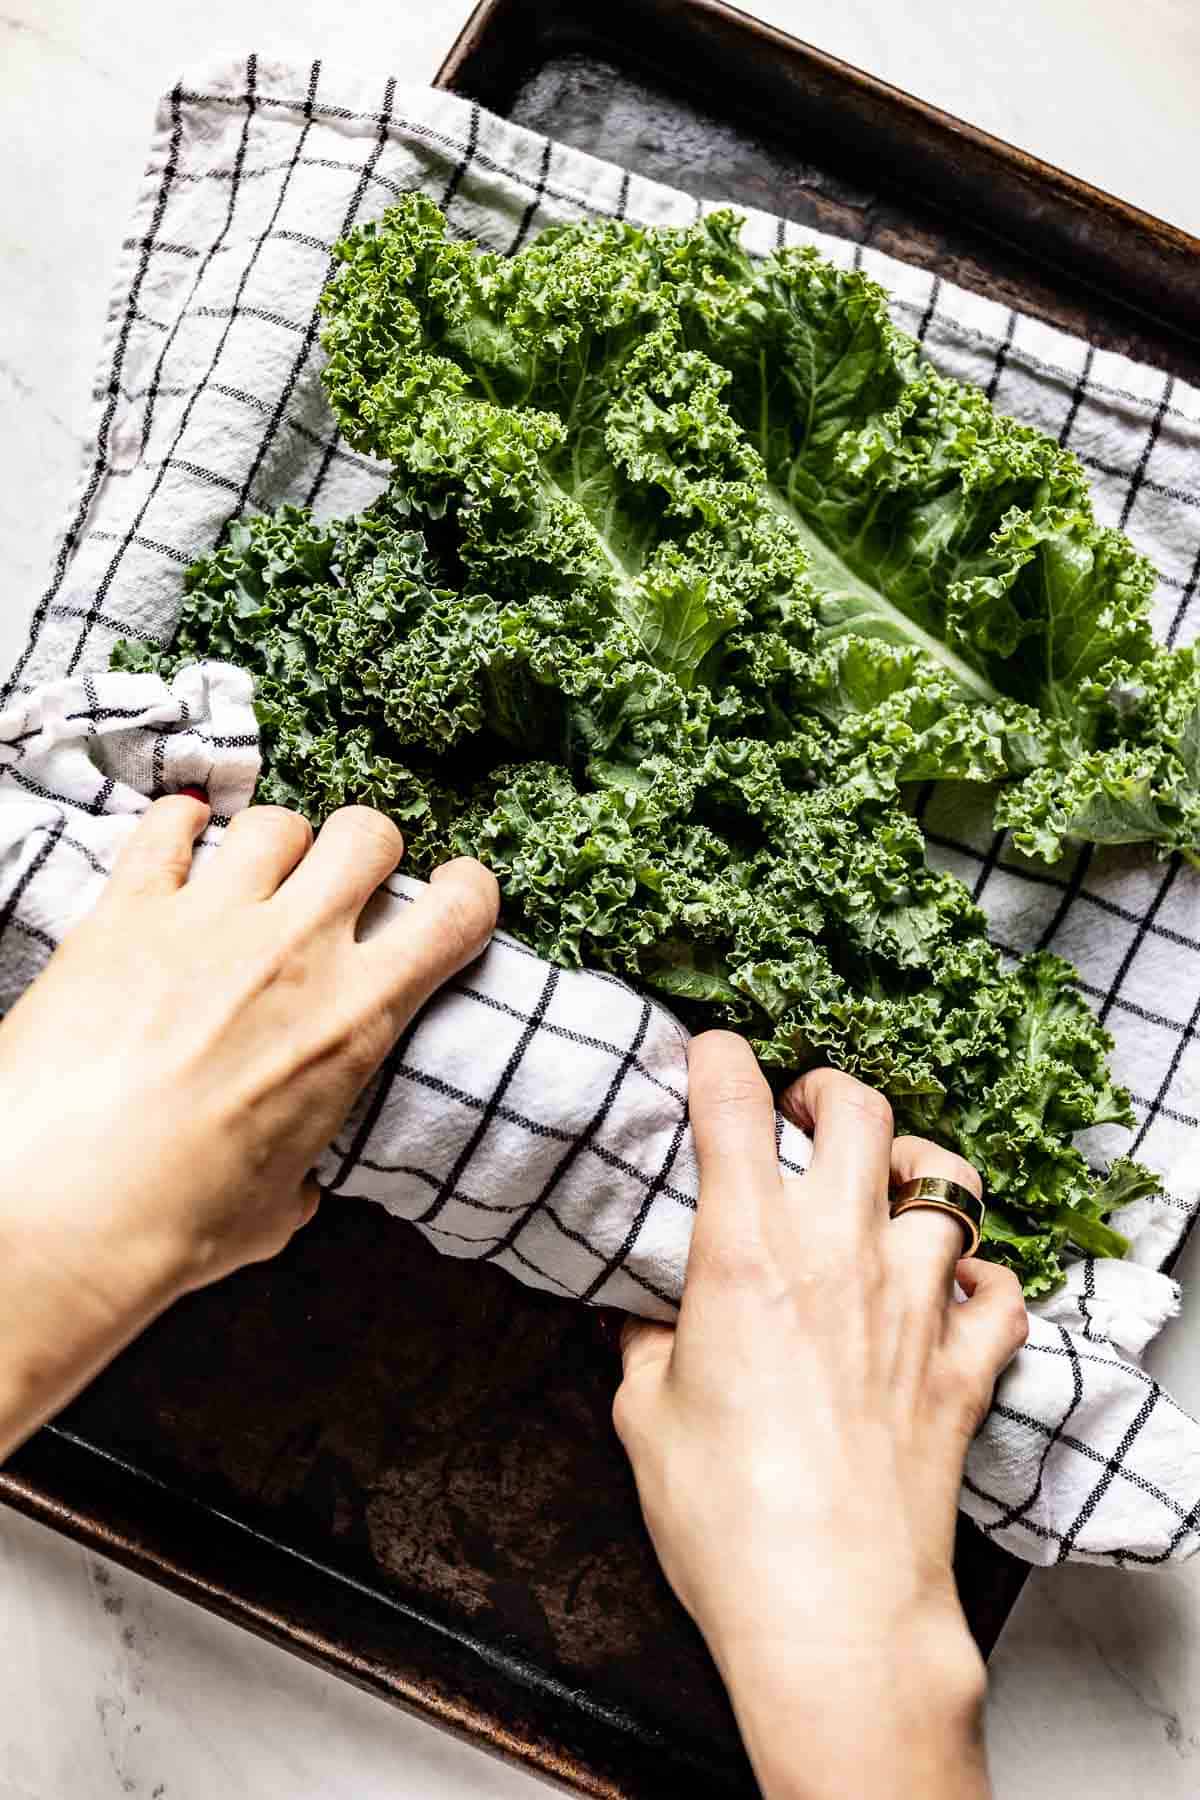 How Much Kale Can You Eat Per Week?